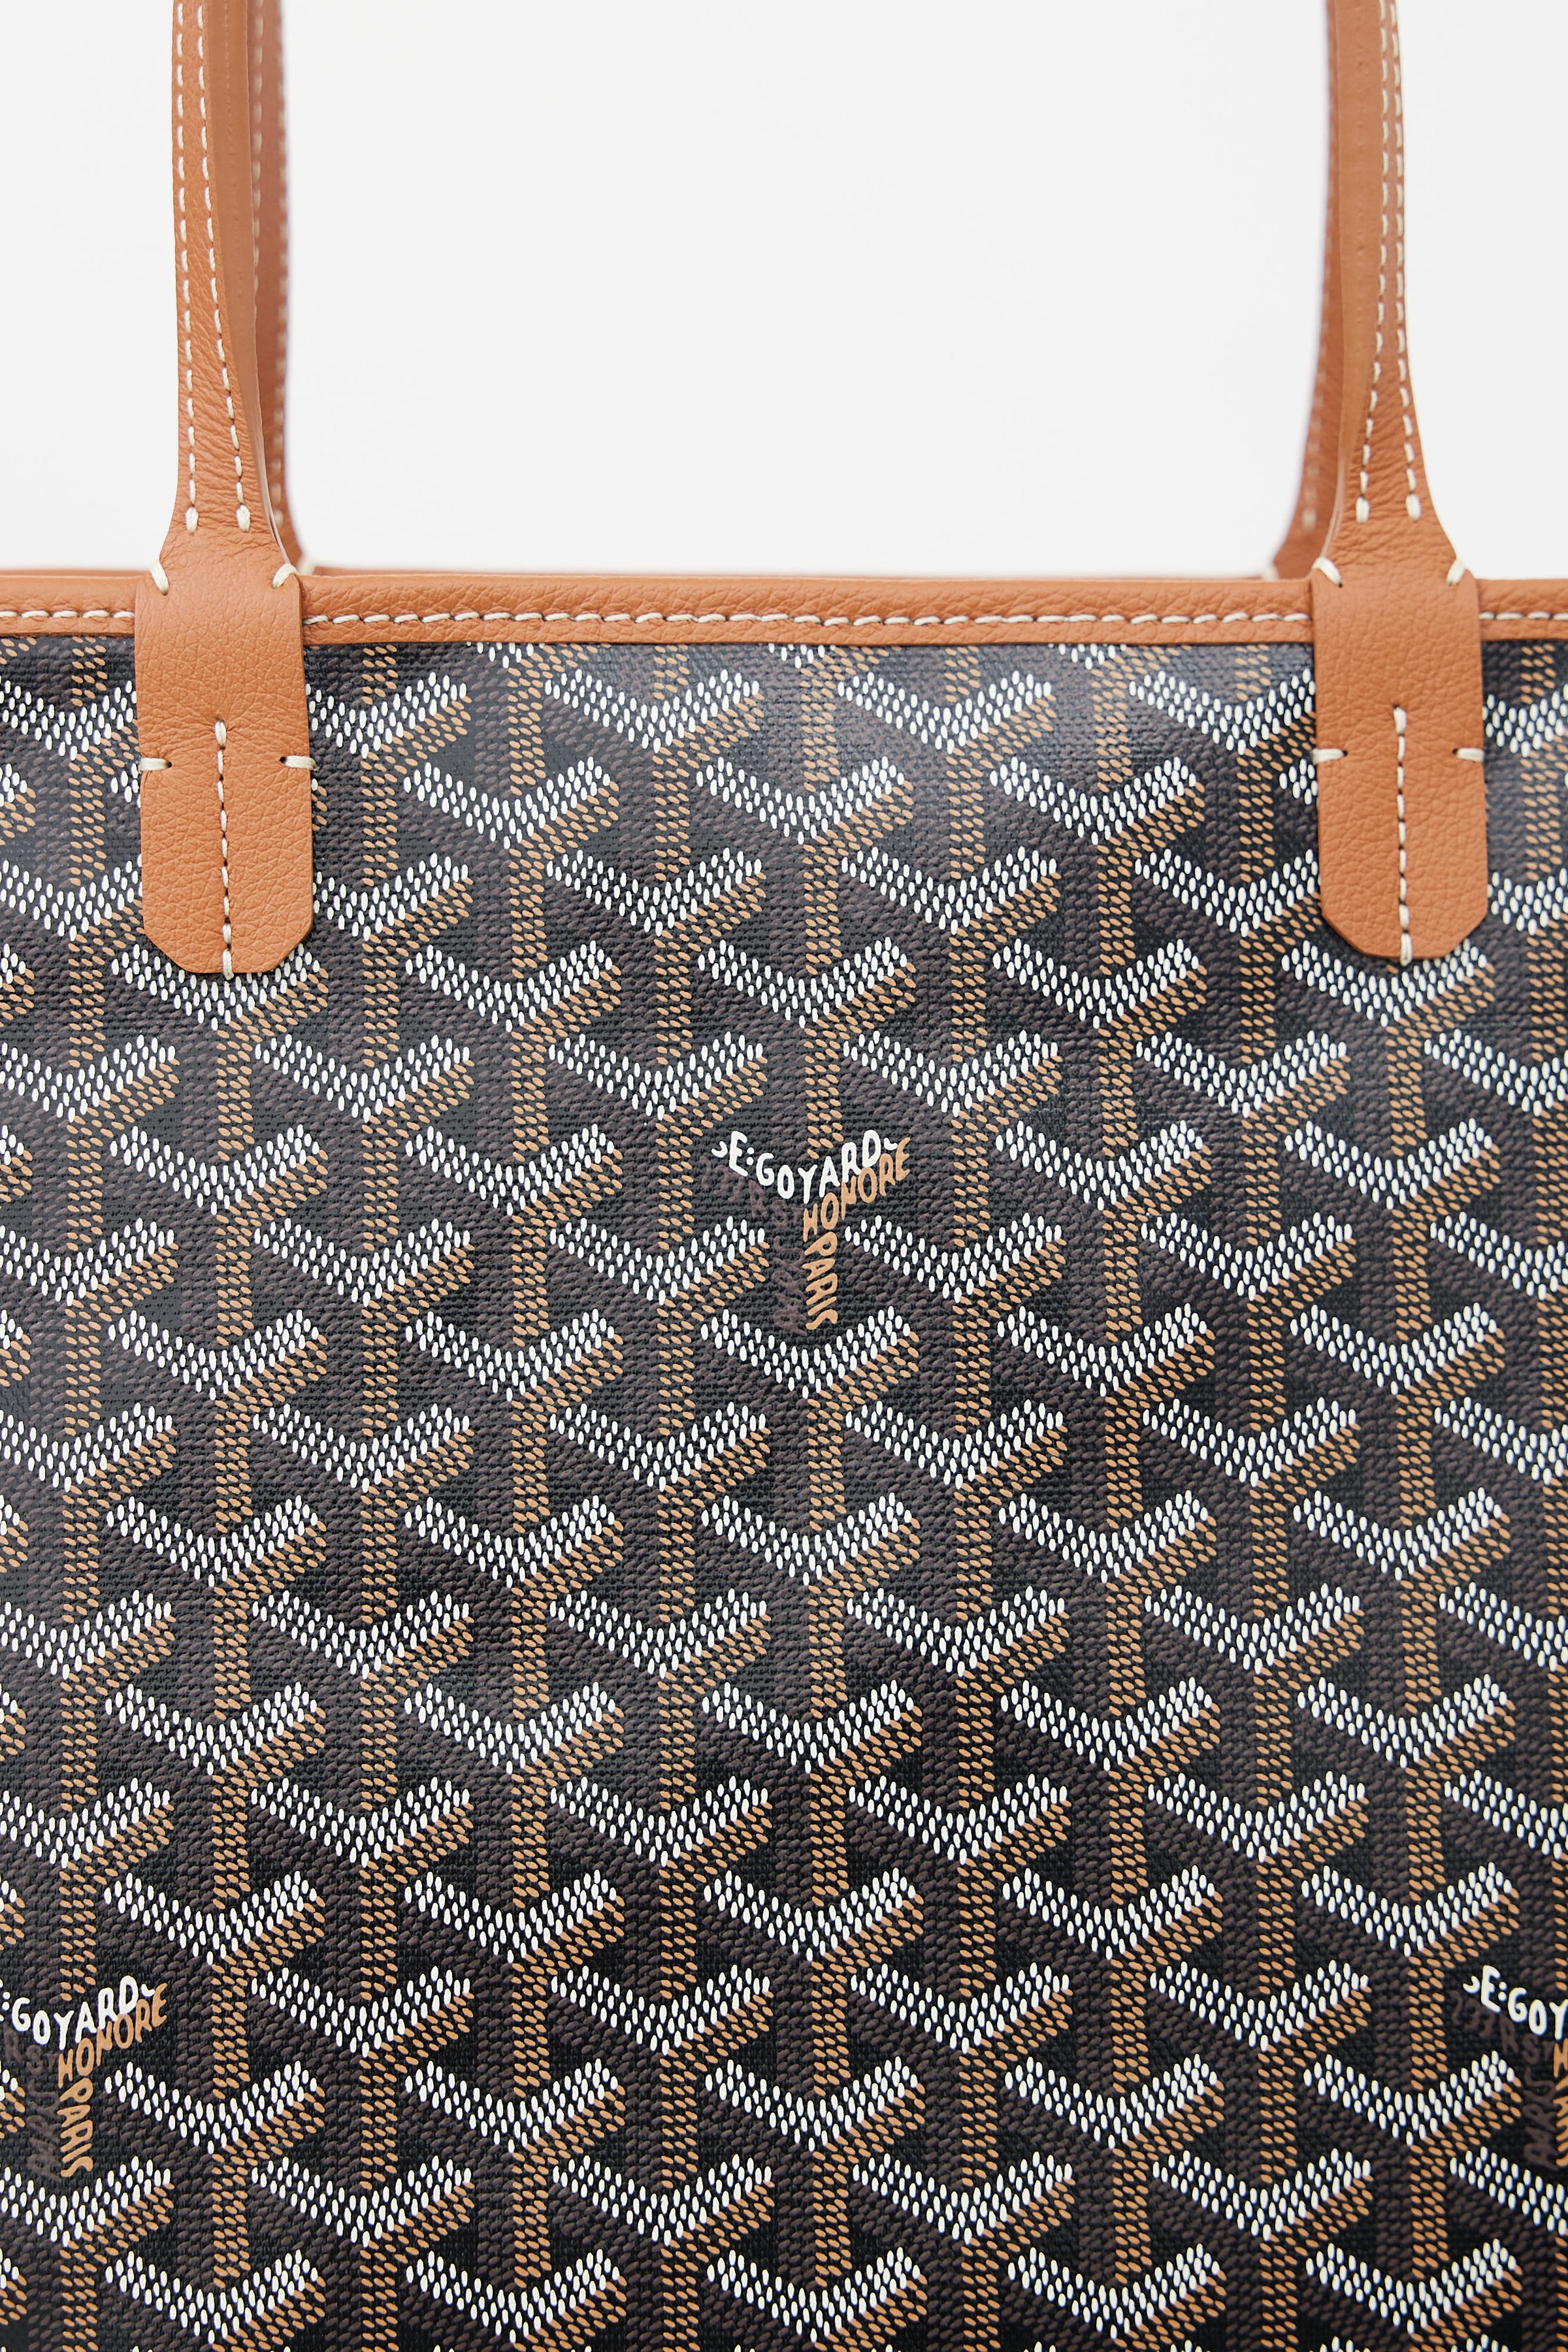 Goyard Artois MM Tote Black with Tan Trim, Comes With Dustbag